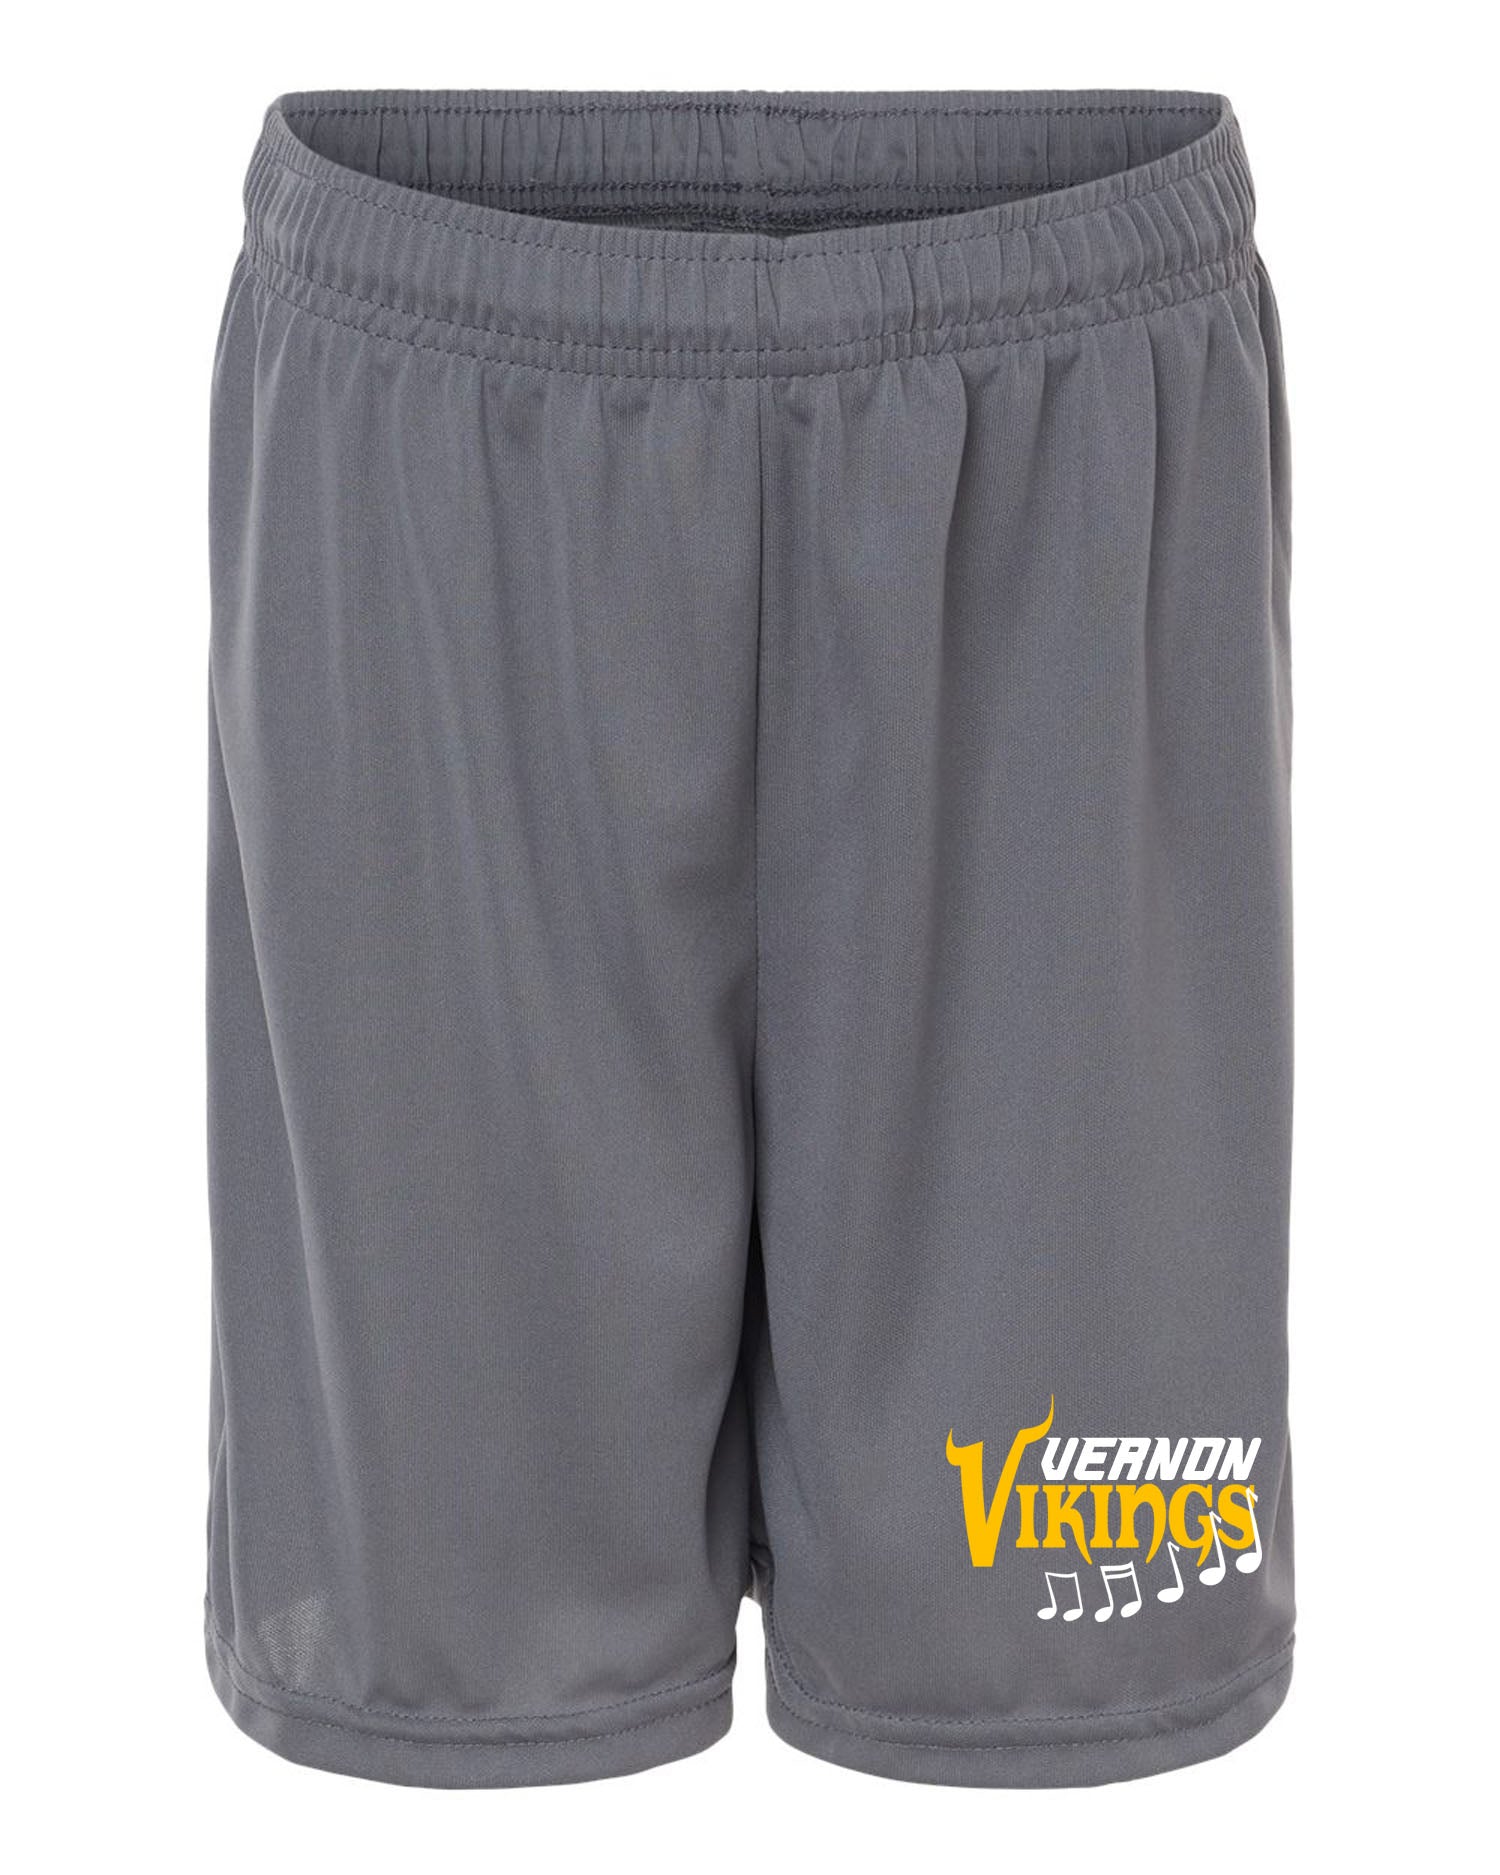 Vernon Marching Band Performance Shorts Design 2